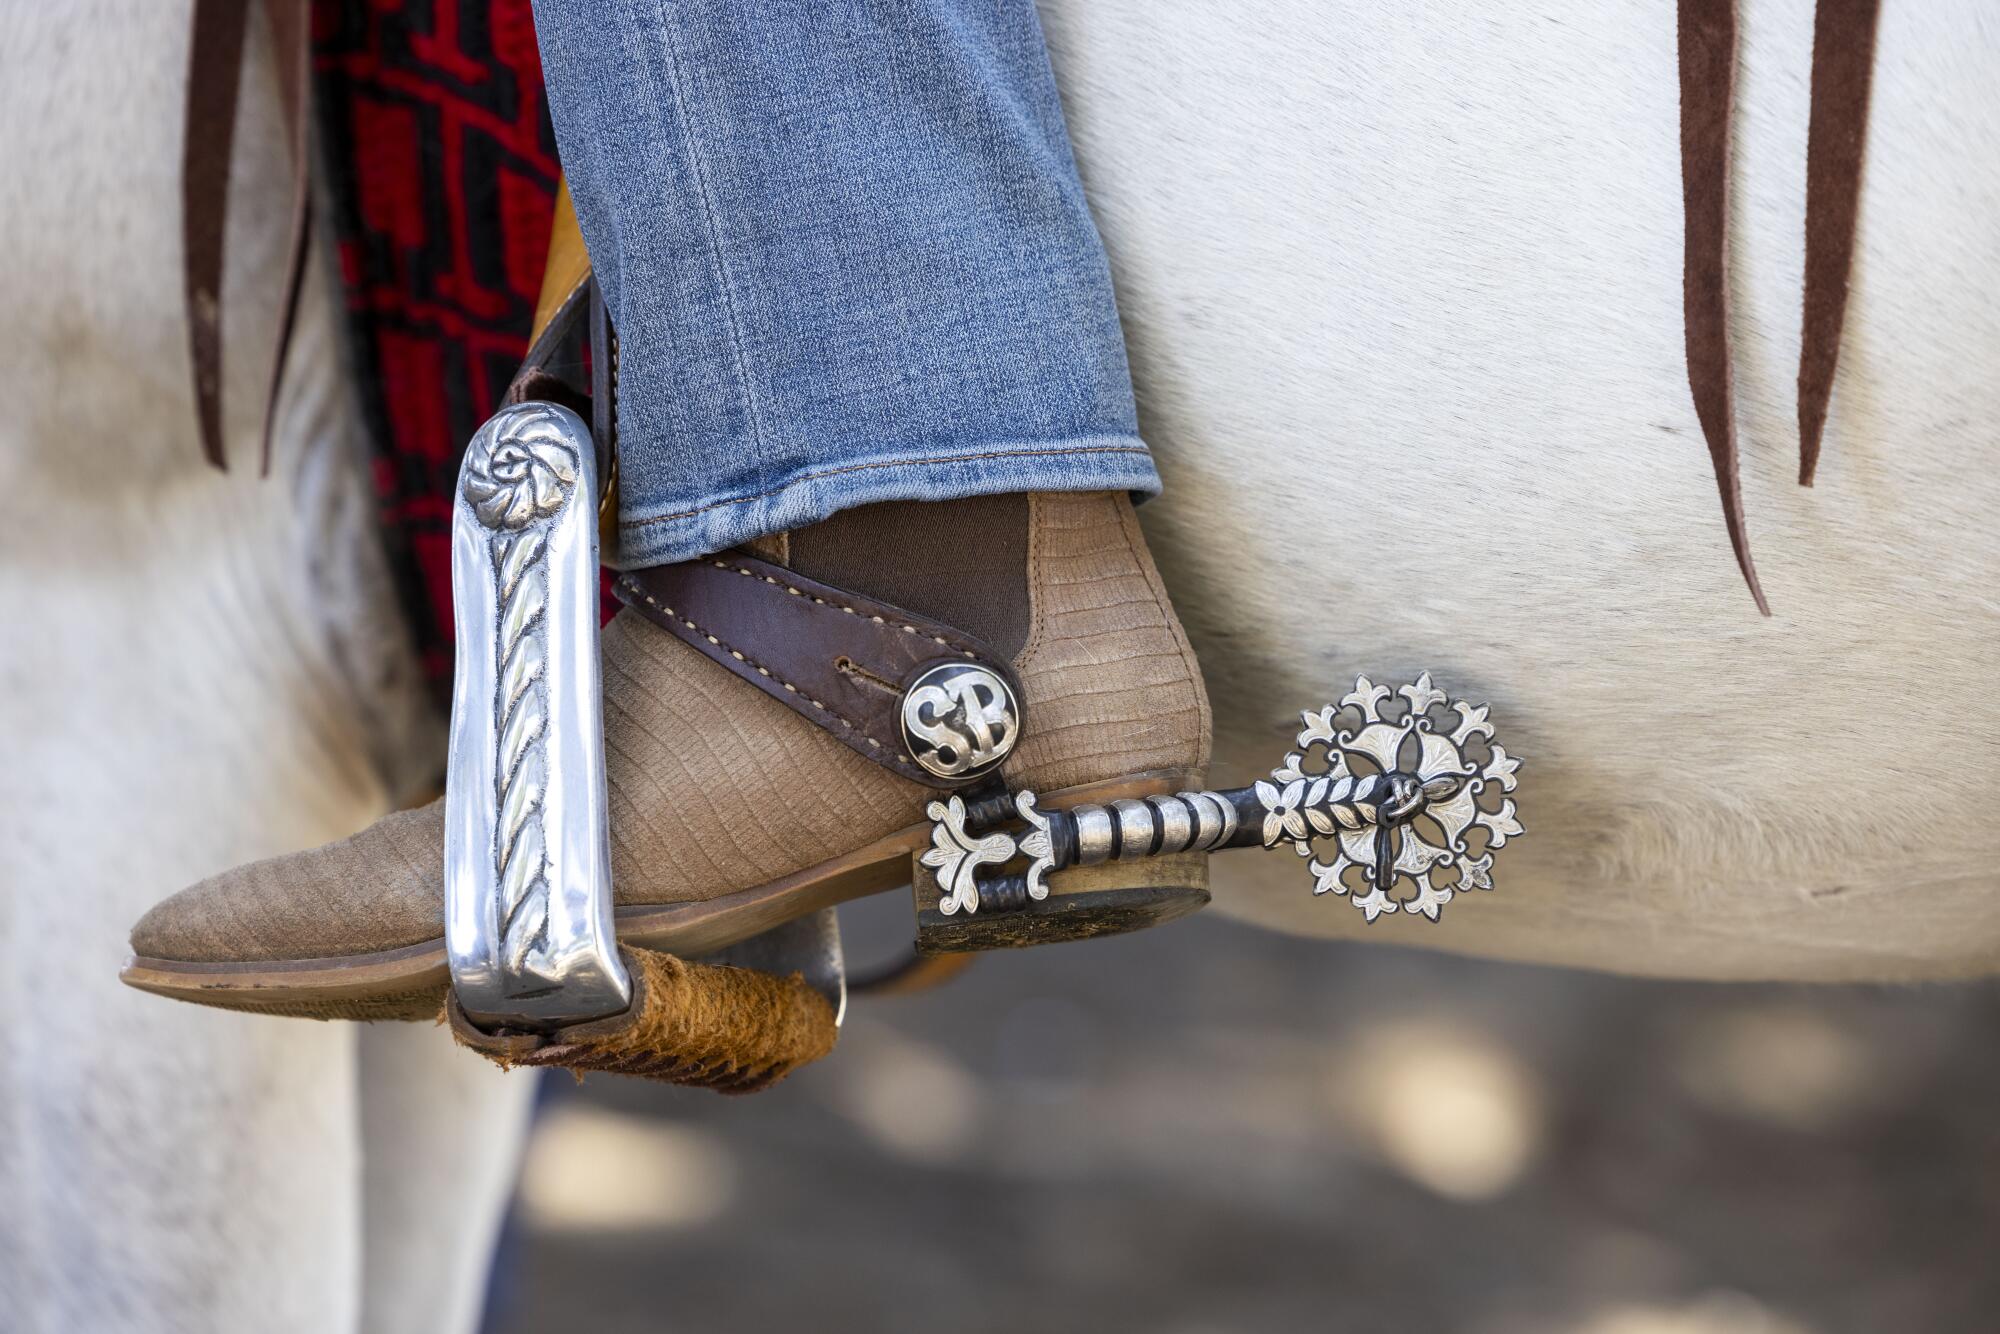 A close-up of a boot and spur of a person riding a horse